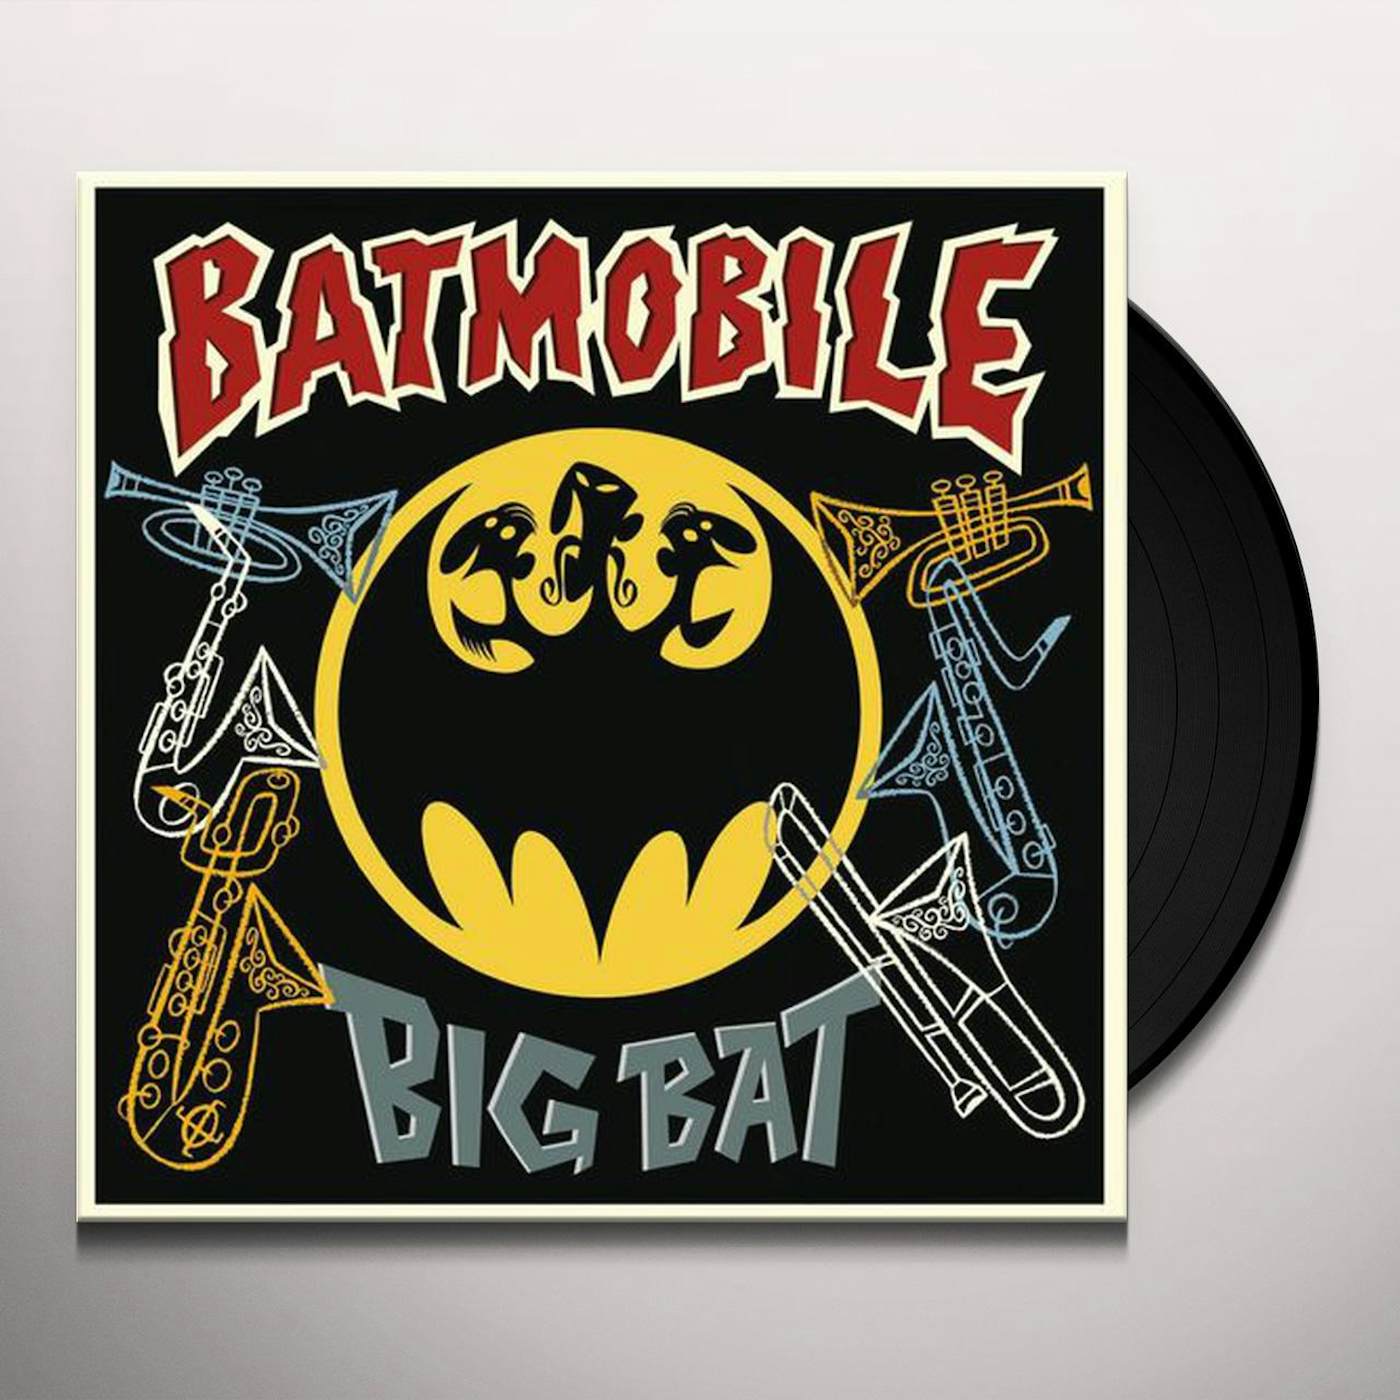 Batmobile BIG BAT: THEIR CLASSIC HITS WITH HORNS ADDED! Vinyl Record